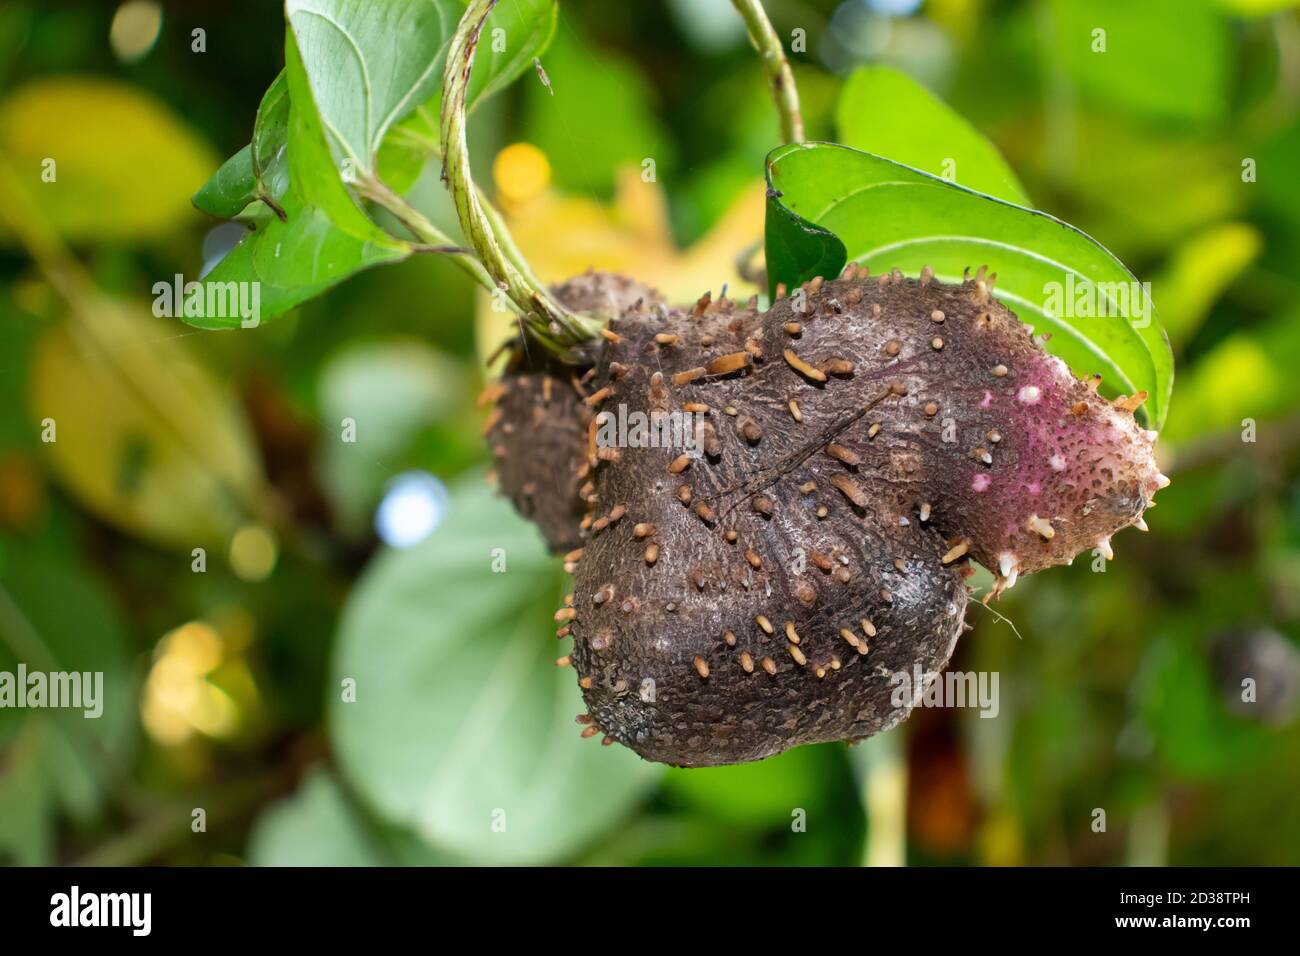 Different type of potatoes on creepers green tree that grow above land Stock Photo